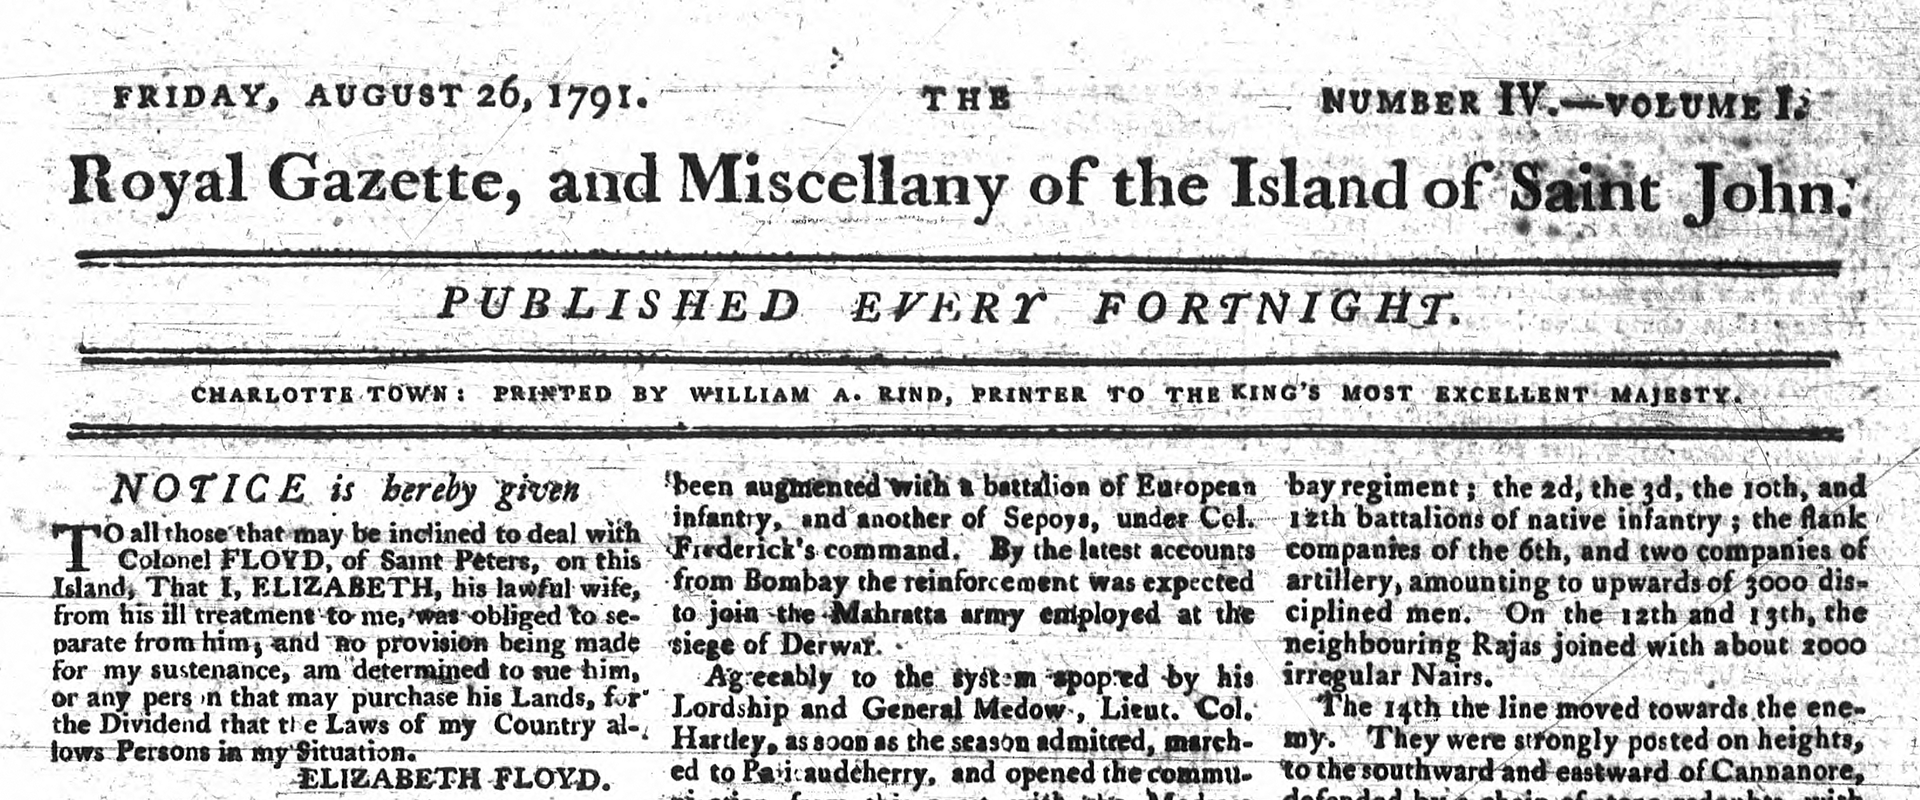 The front page banner from the Royal Gazette & Miscellany of the Island of Saint John published on 26 August 1791